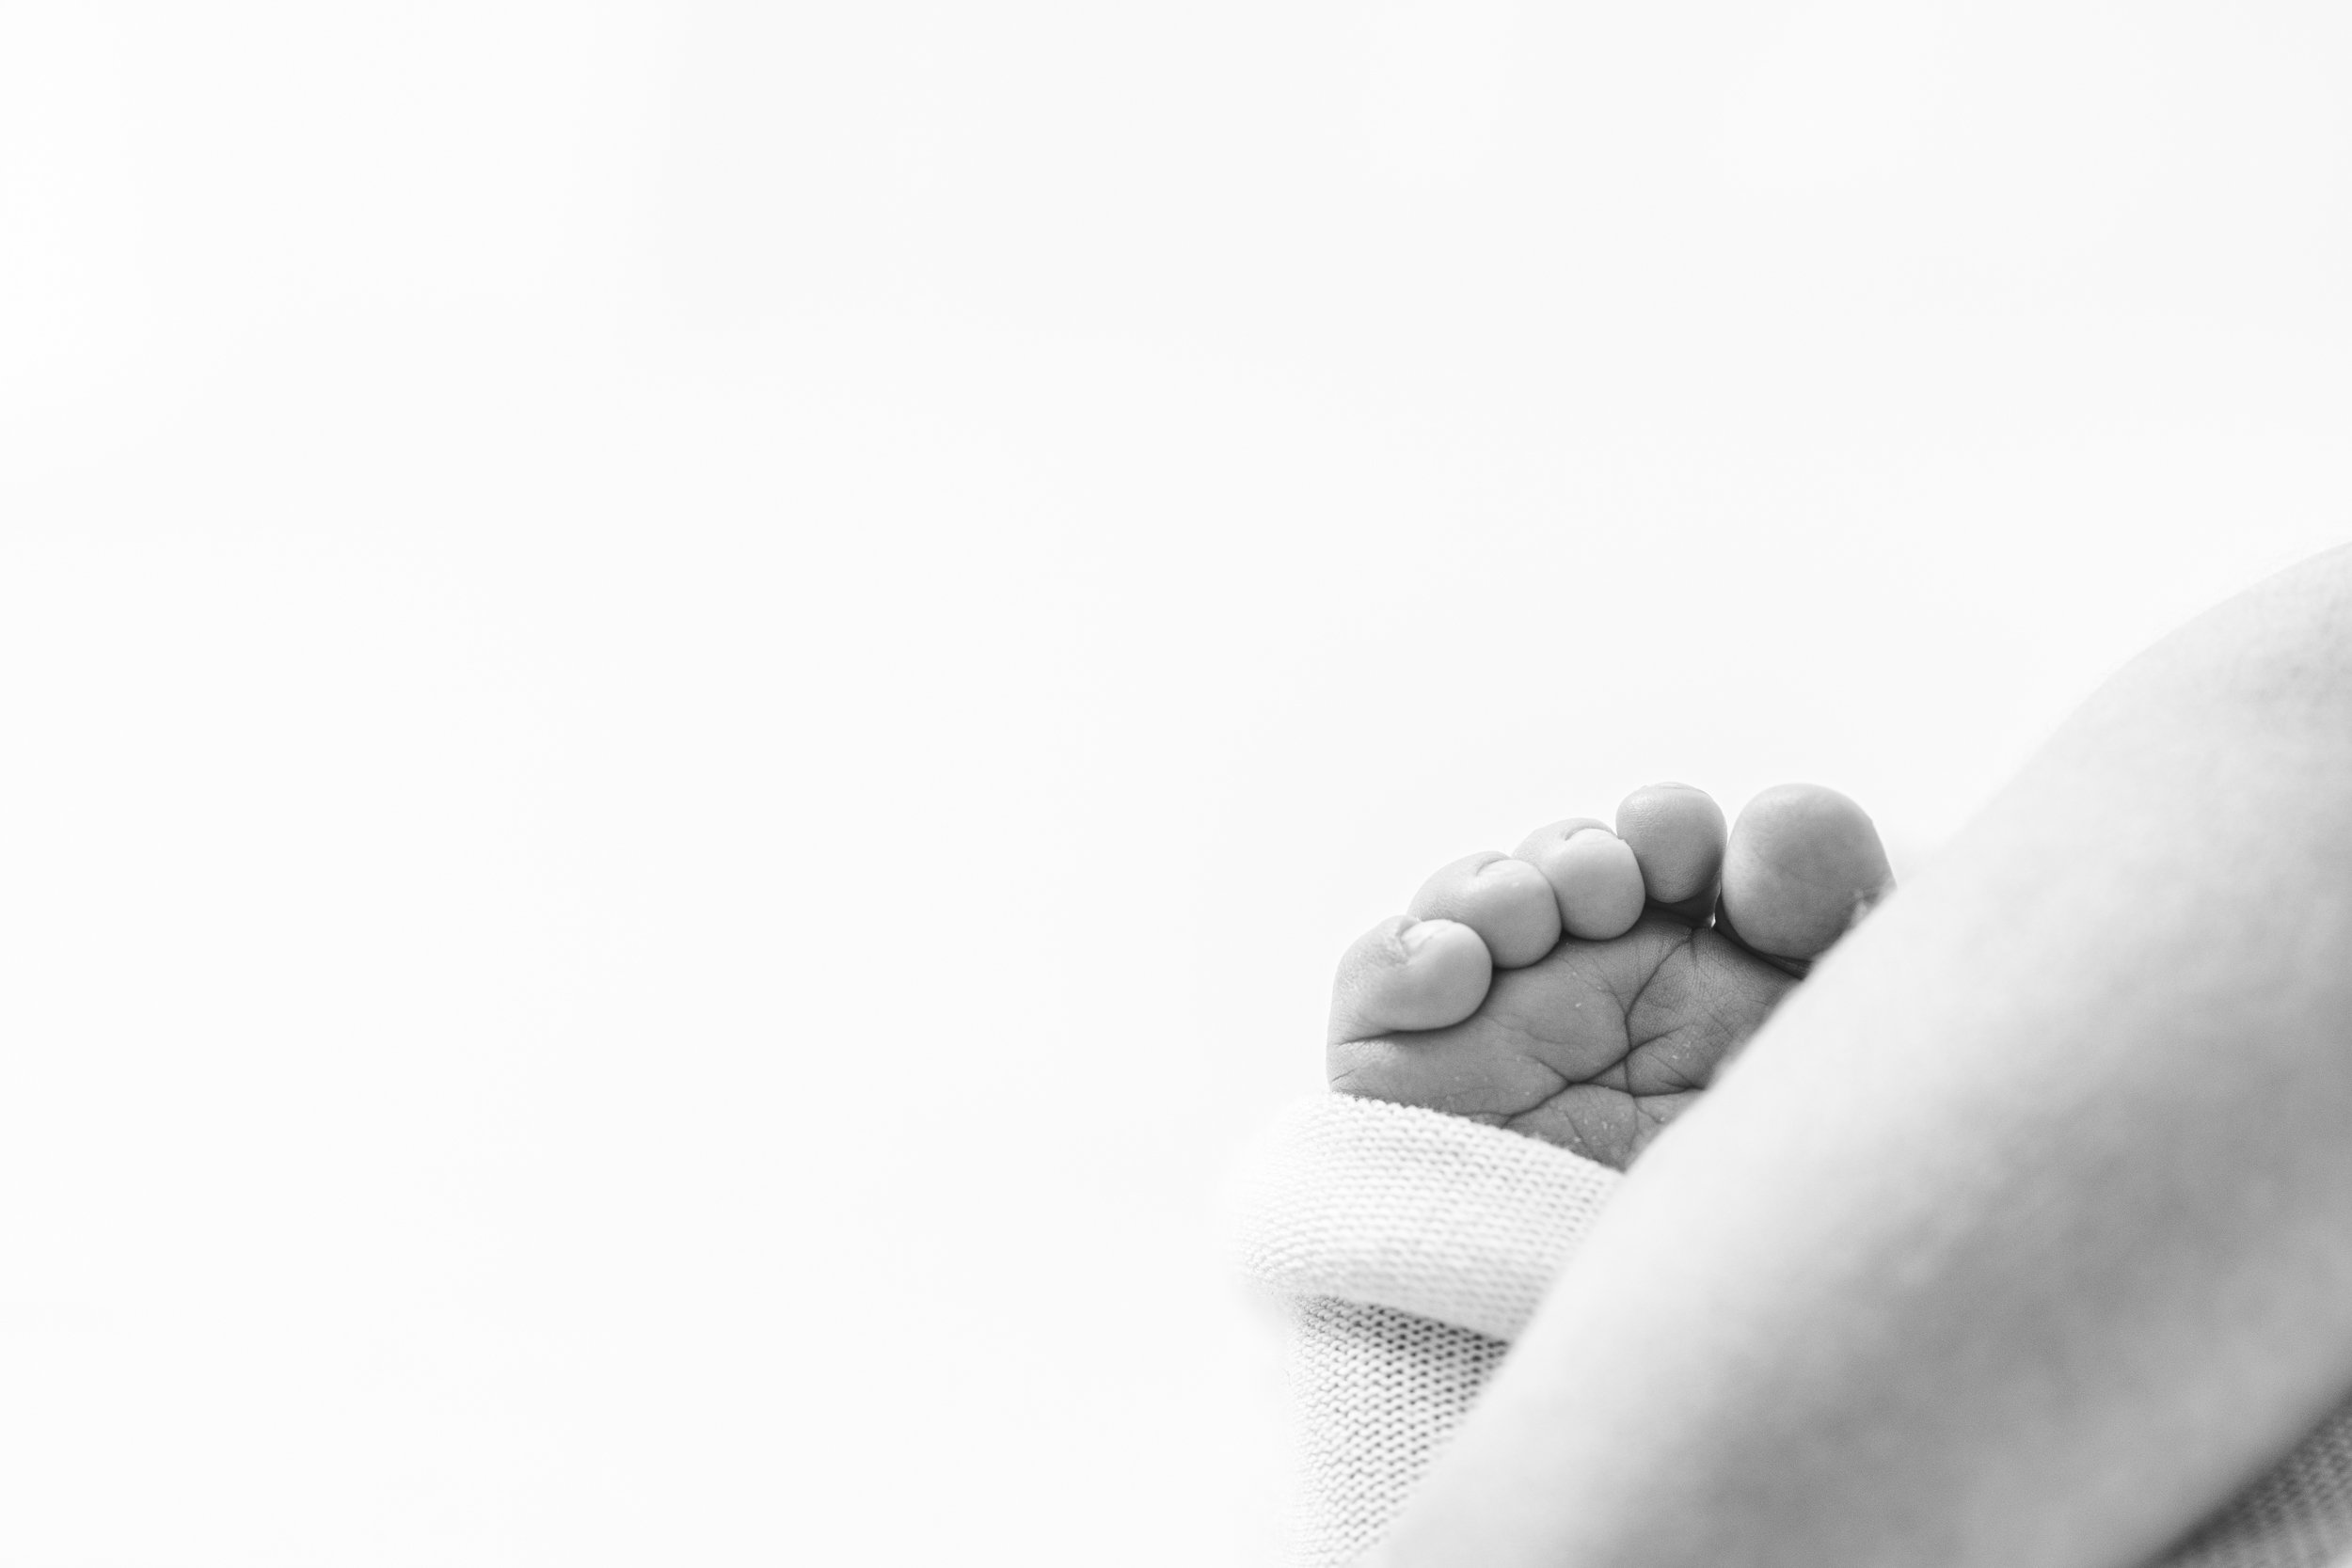  A black and white detailed close-up photo of a baby's foot and little toes by Nicole Hawkins Photography, a professional New Jersey photographer. high end newborn photographers NJ professional newborn photographers #nicolehawkinsphotography #nicoleh